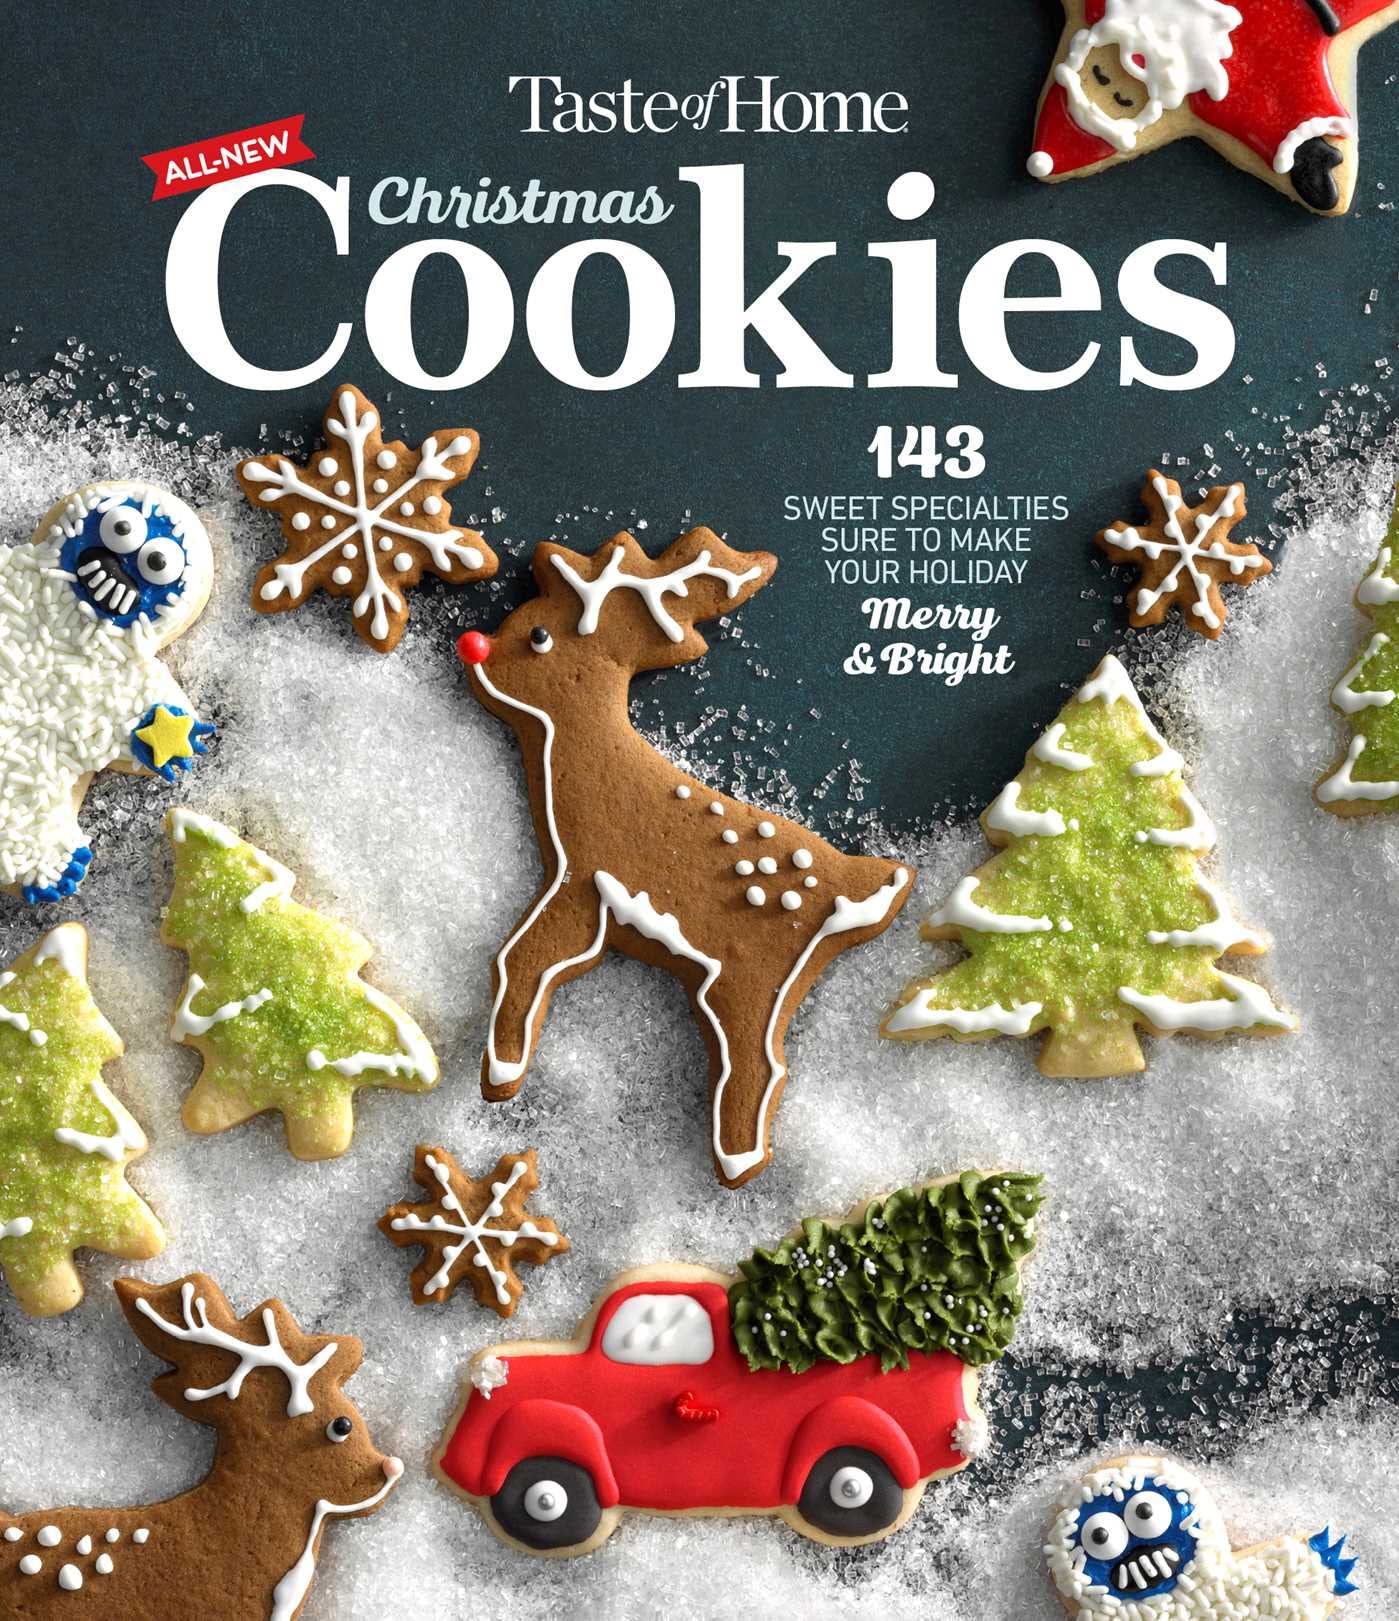 Taste of Home All New Christmas Cookies: 143 sweet specialties sure to make your holiday merry and bright (2) (TOH Mini Binder)